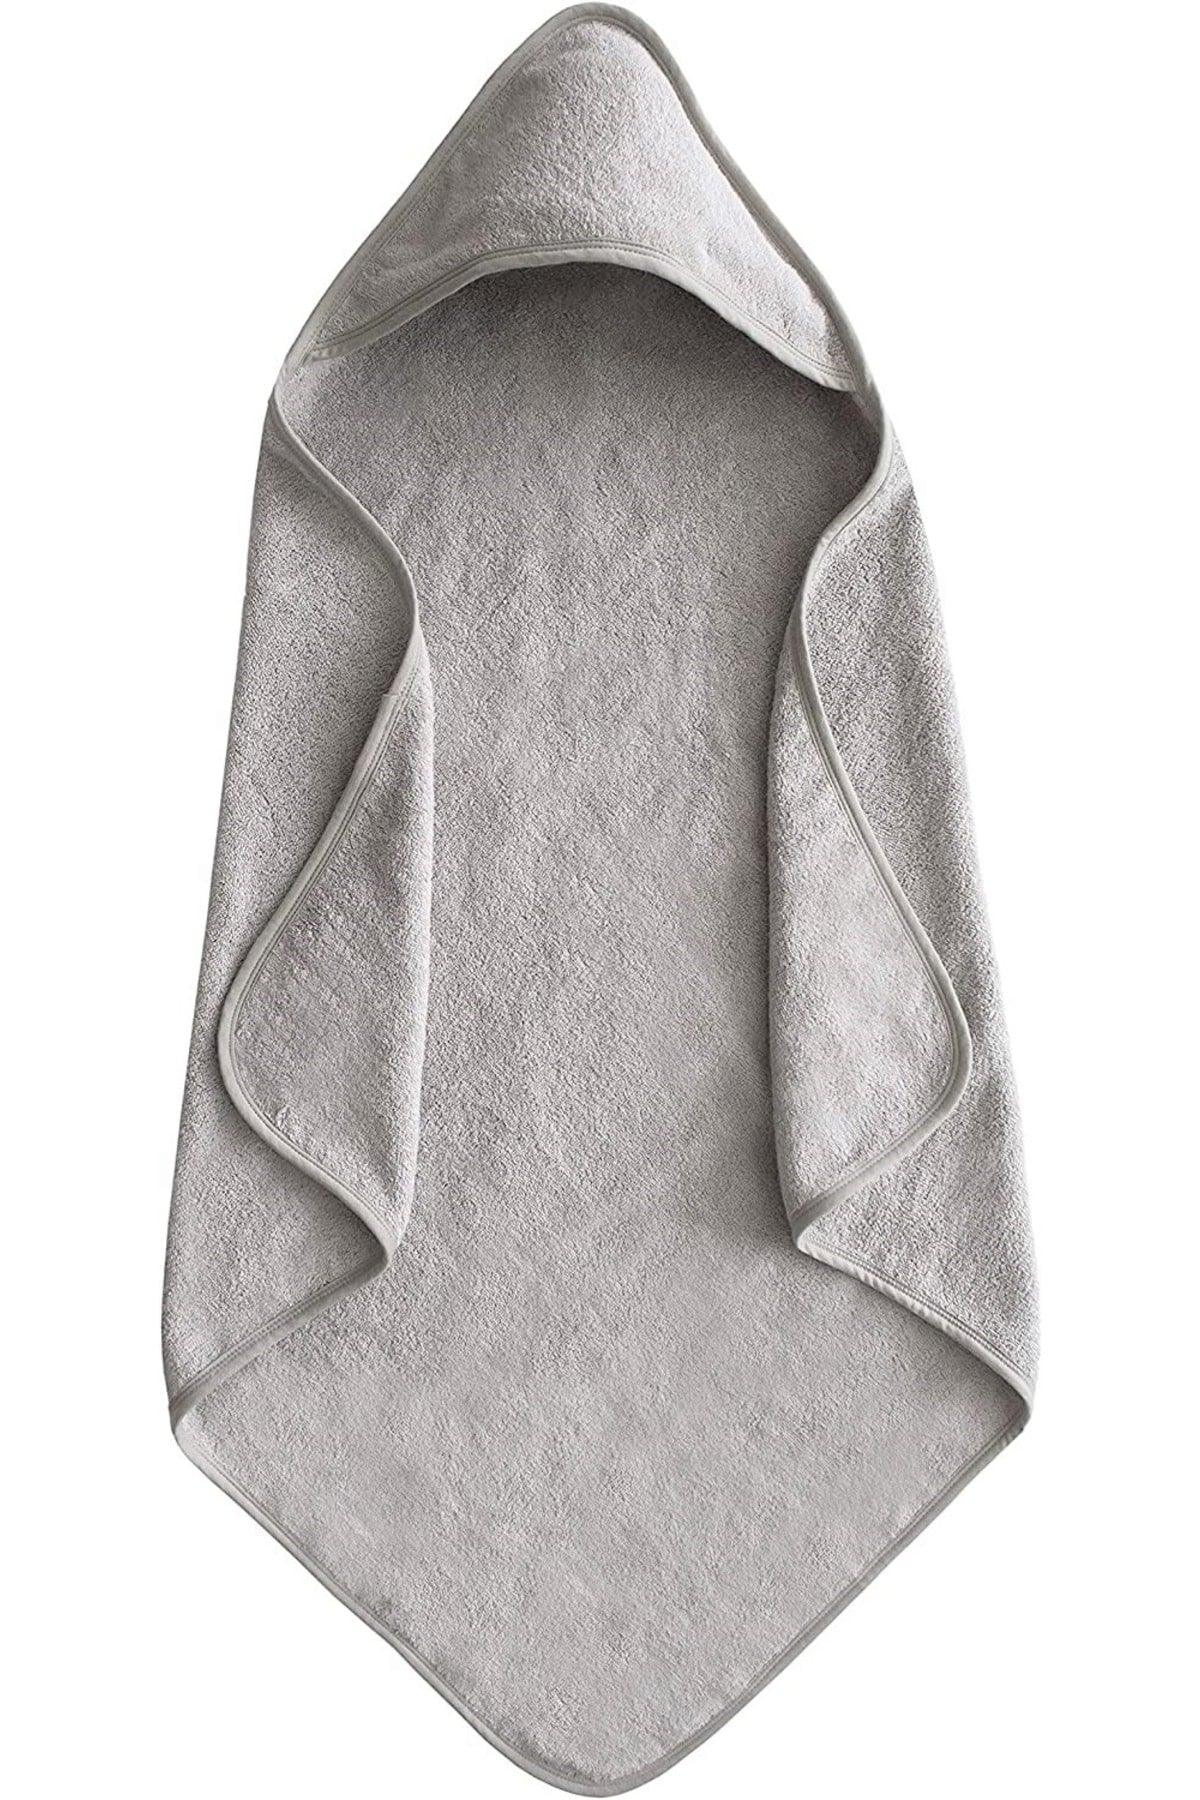 Cotton Baby-kids Hooded Towel Gray Swaddle